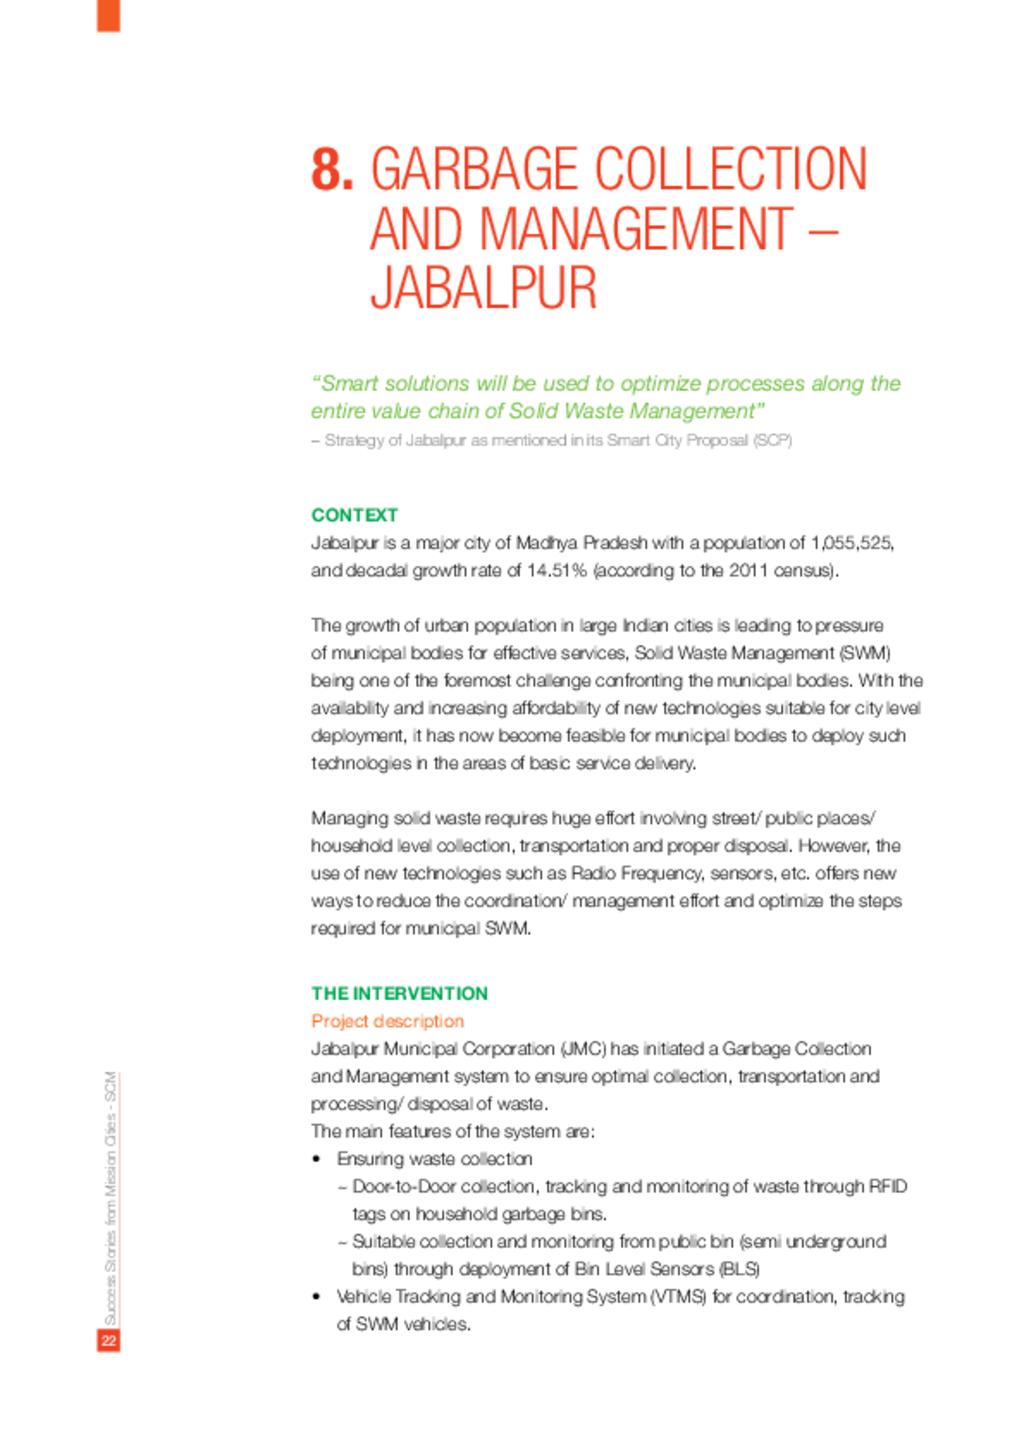 Garbage Collection and Management - Jabalpur